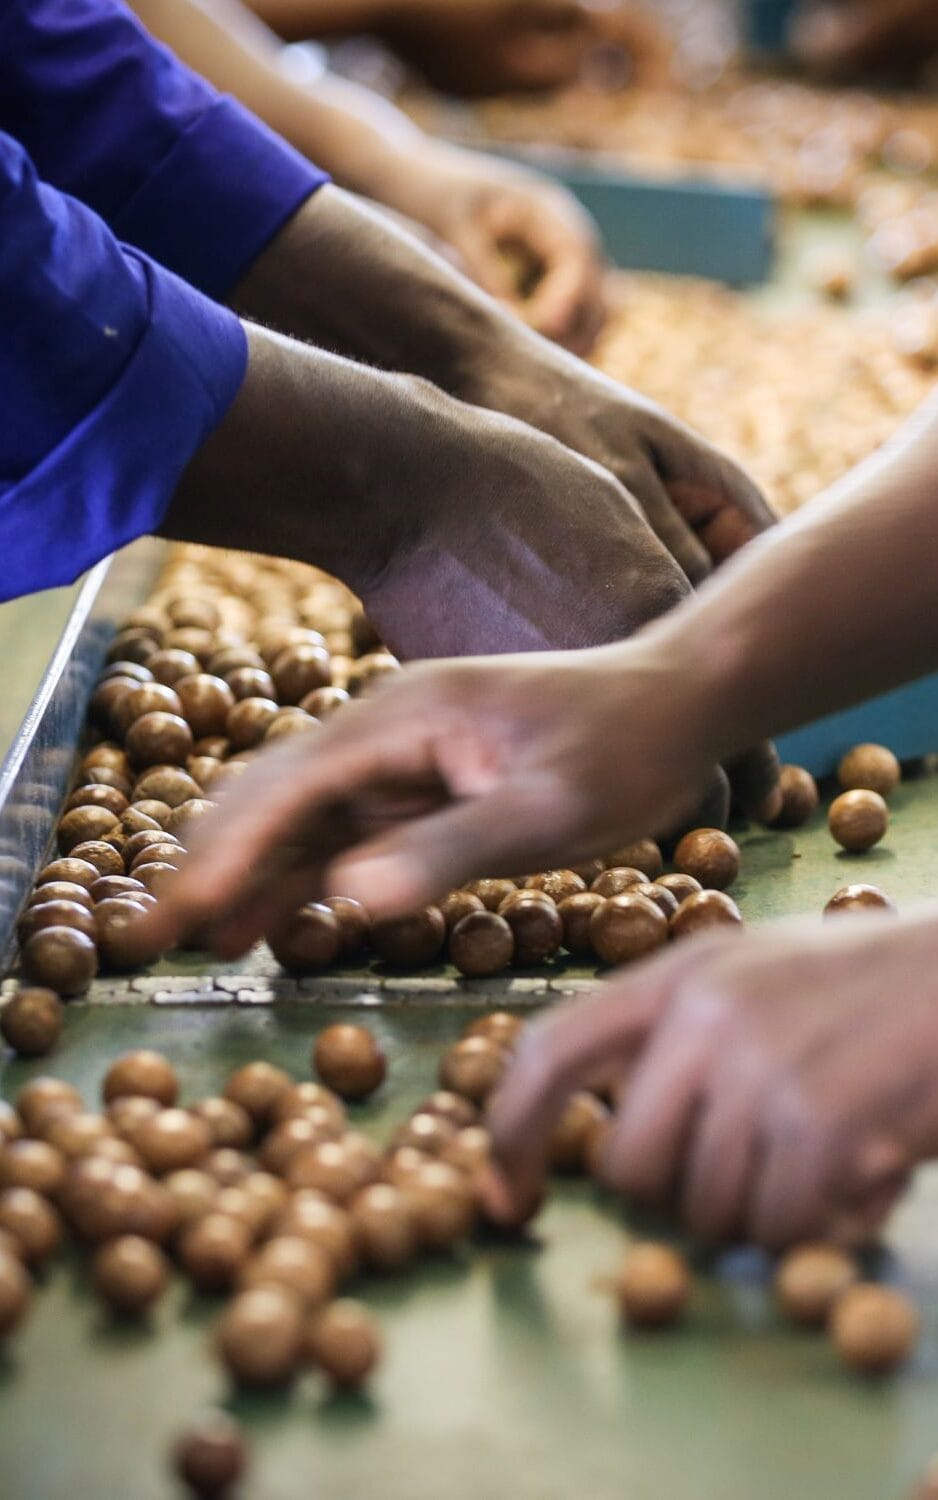 Hands sorting macadamia nuts at harvest